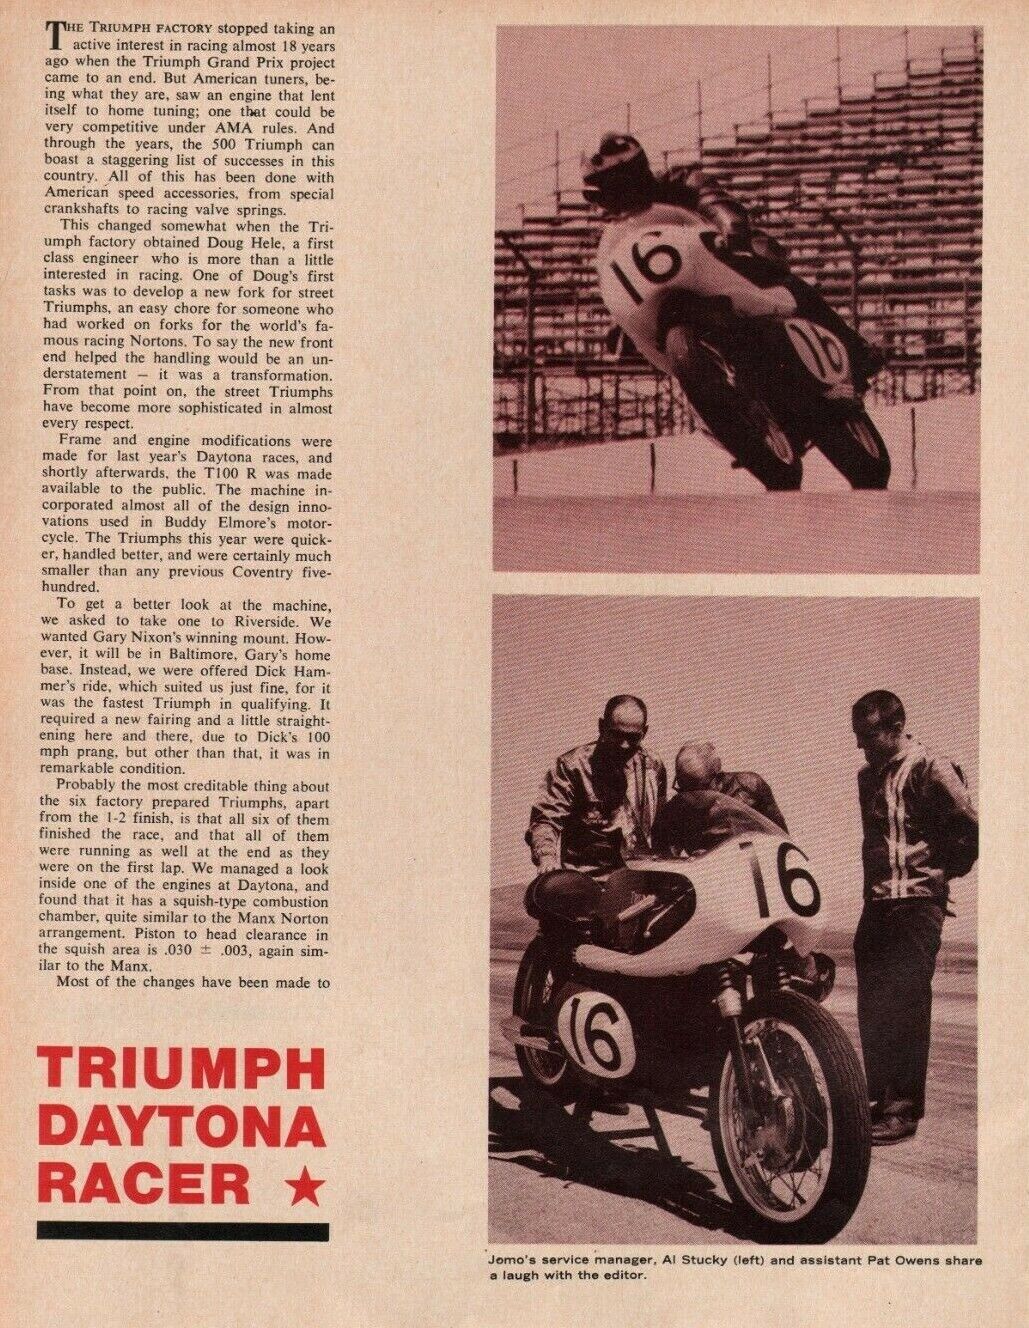 1967 Triumph Daytona Racer - 3-Page Vintage Motorcycle Road Test Article